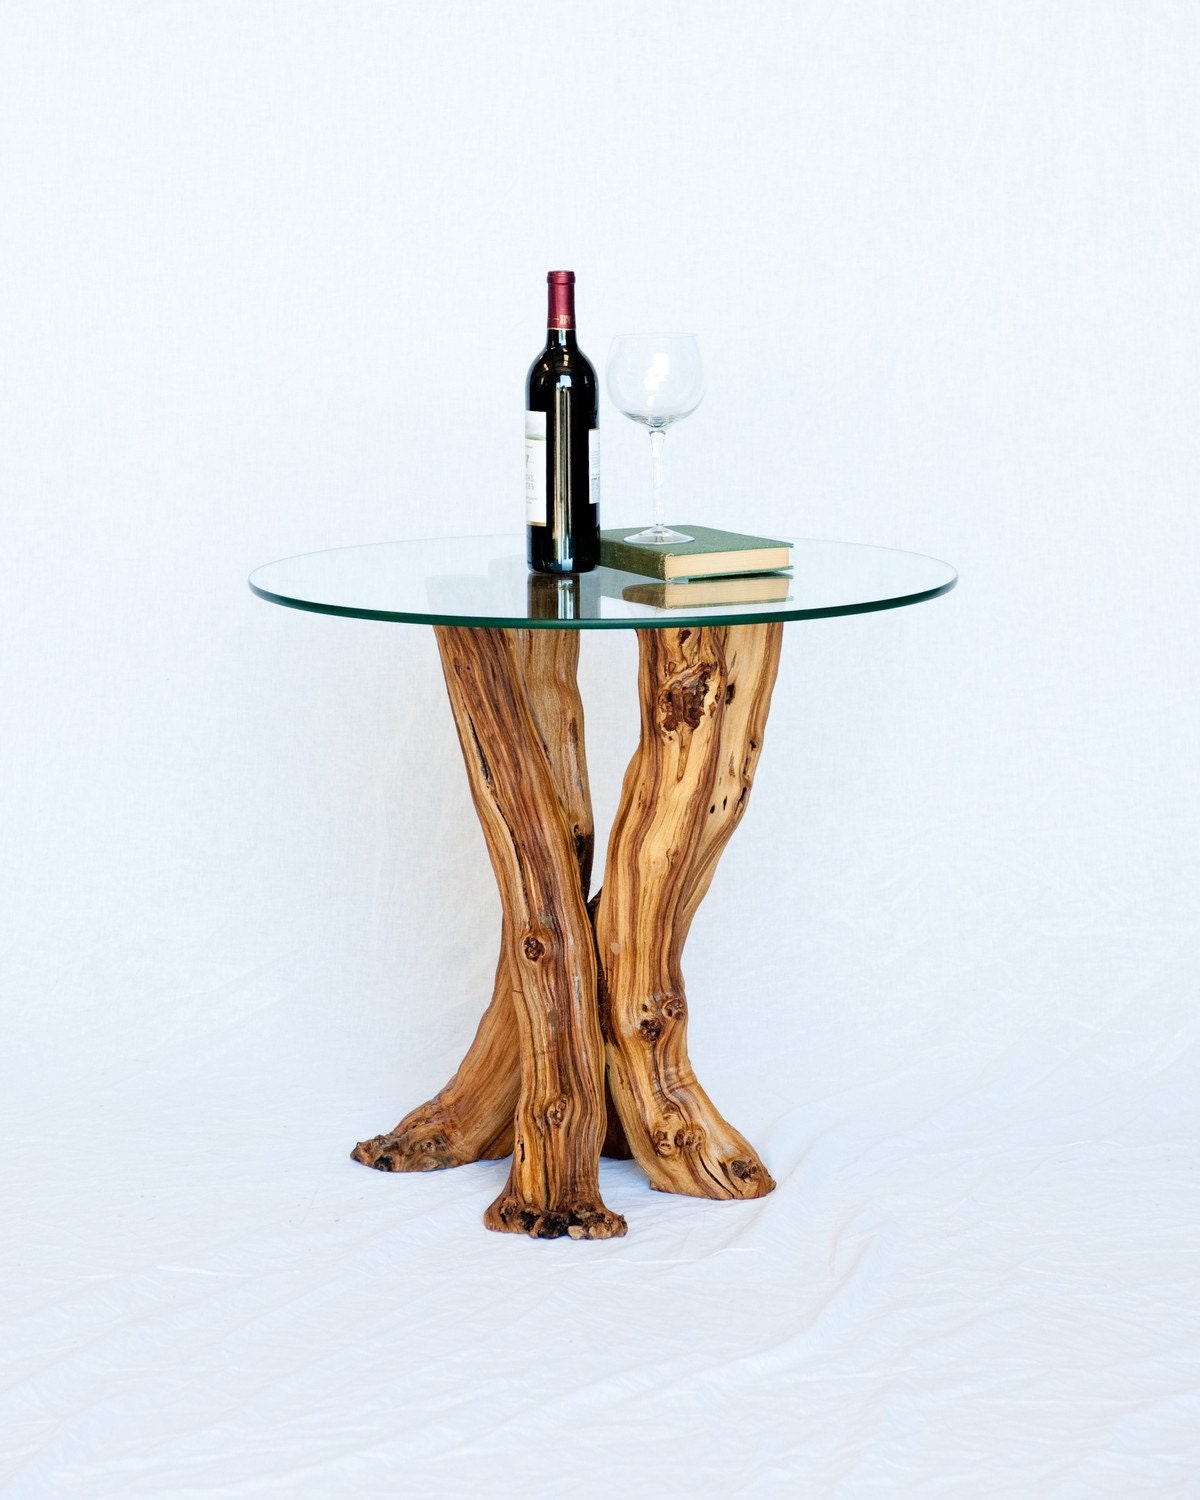 Grapevine Side Table - Fiano - Made from retired California grapevines. 100% Recycled!